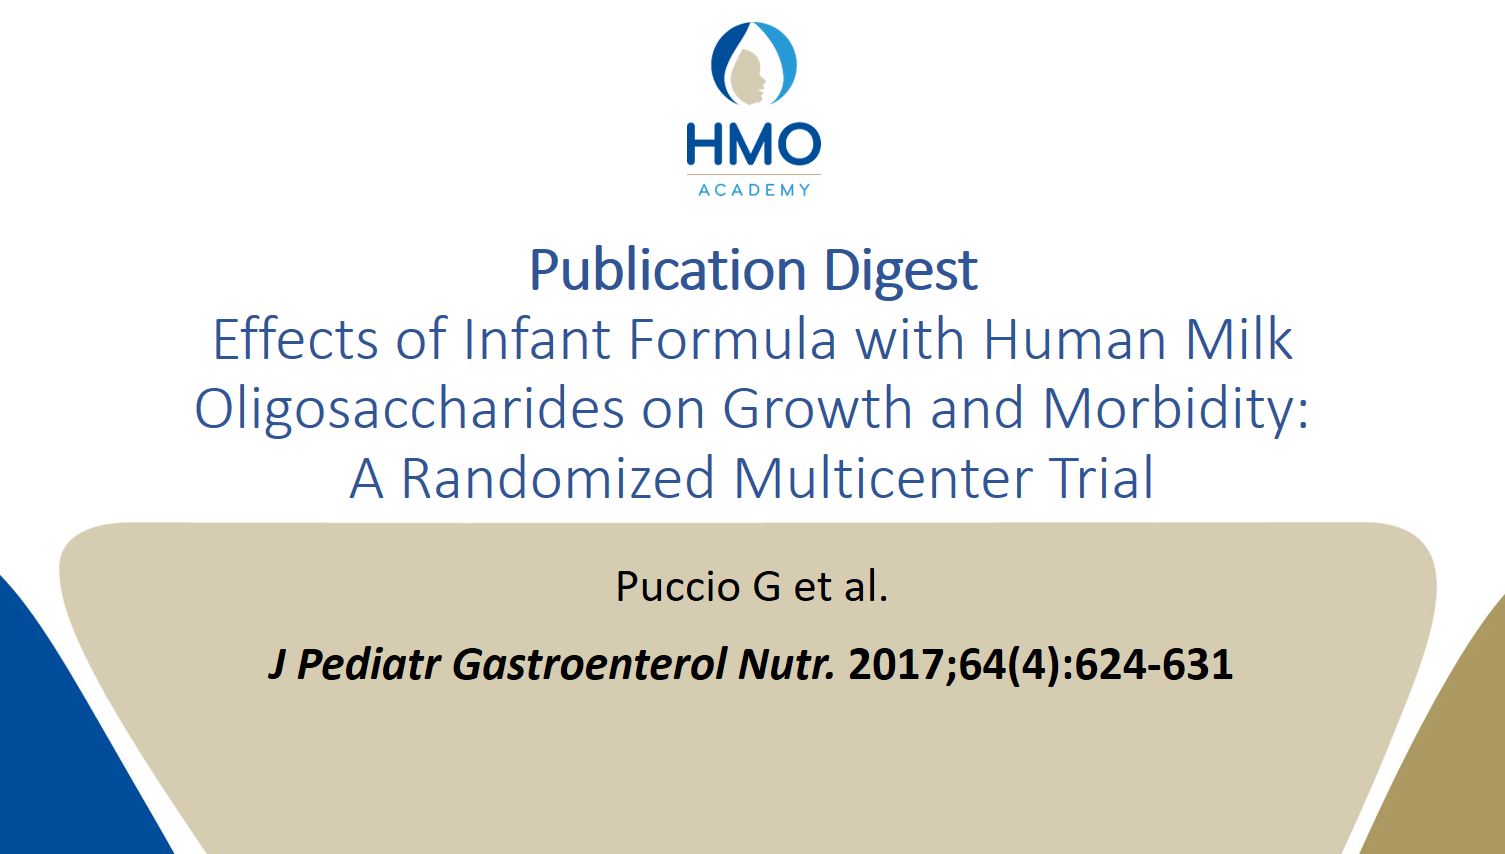 Effects of Infant Formula with Human Milk Oligosaccharides on Growth and Morbidity: A Randomized Multicenter Trial